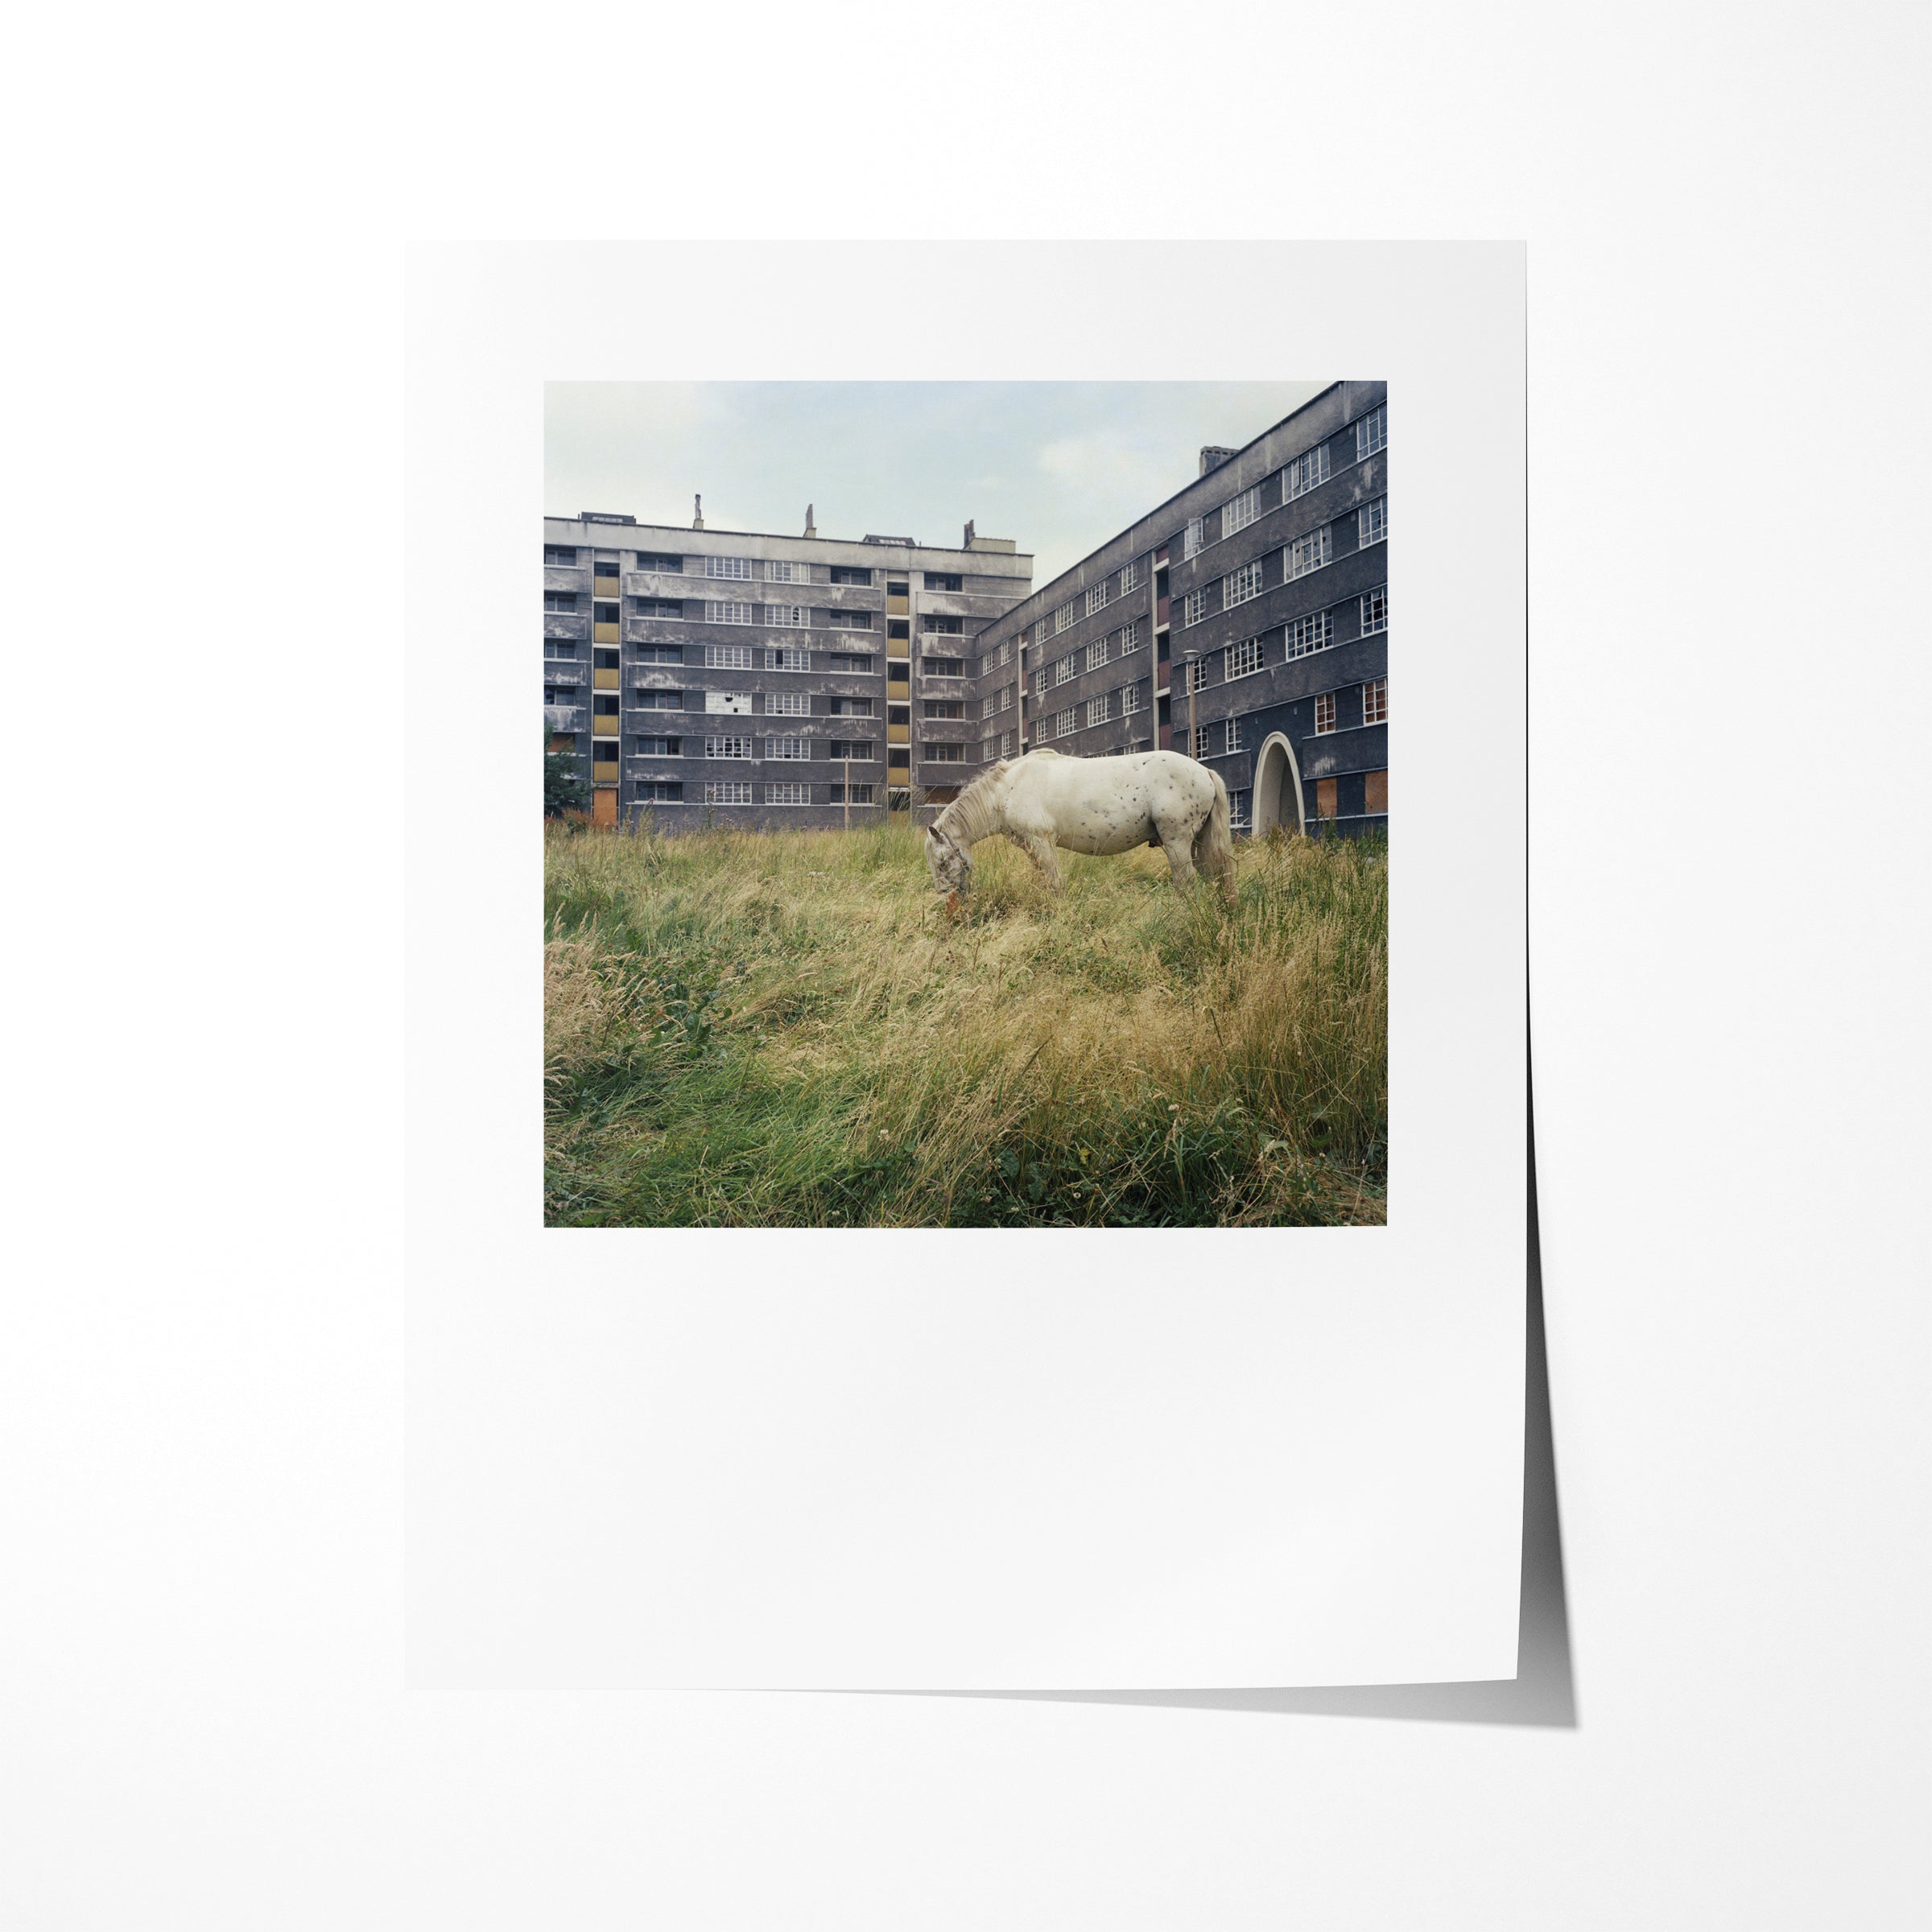 The Pony, Thoresby and Victoria Houses, Quarry Hill Flats, Leeds, 1978 - 7x9" Print